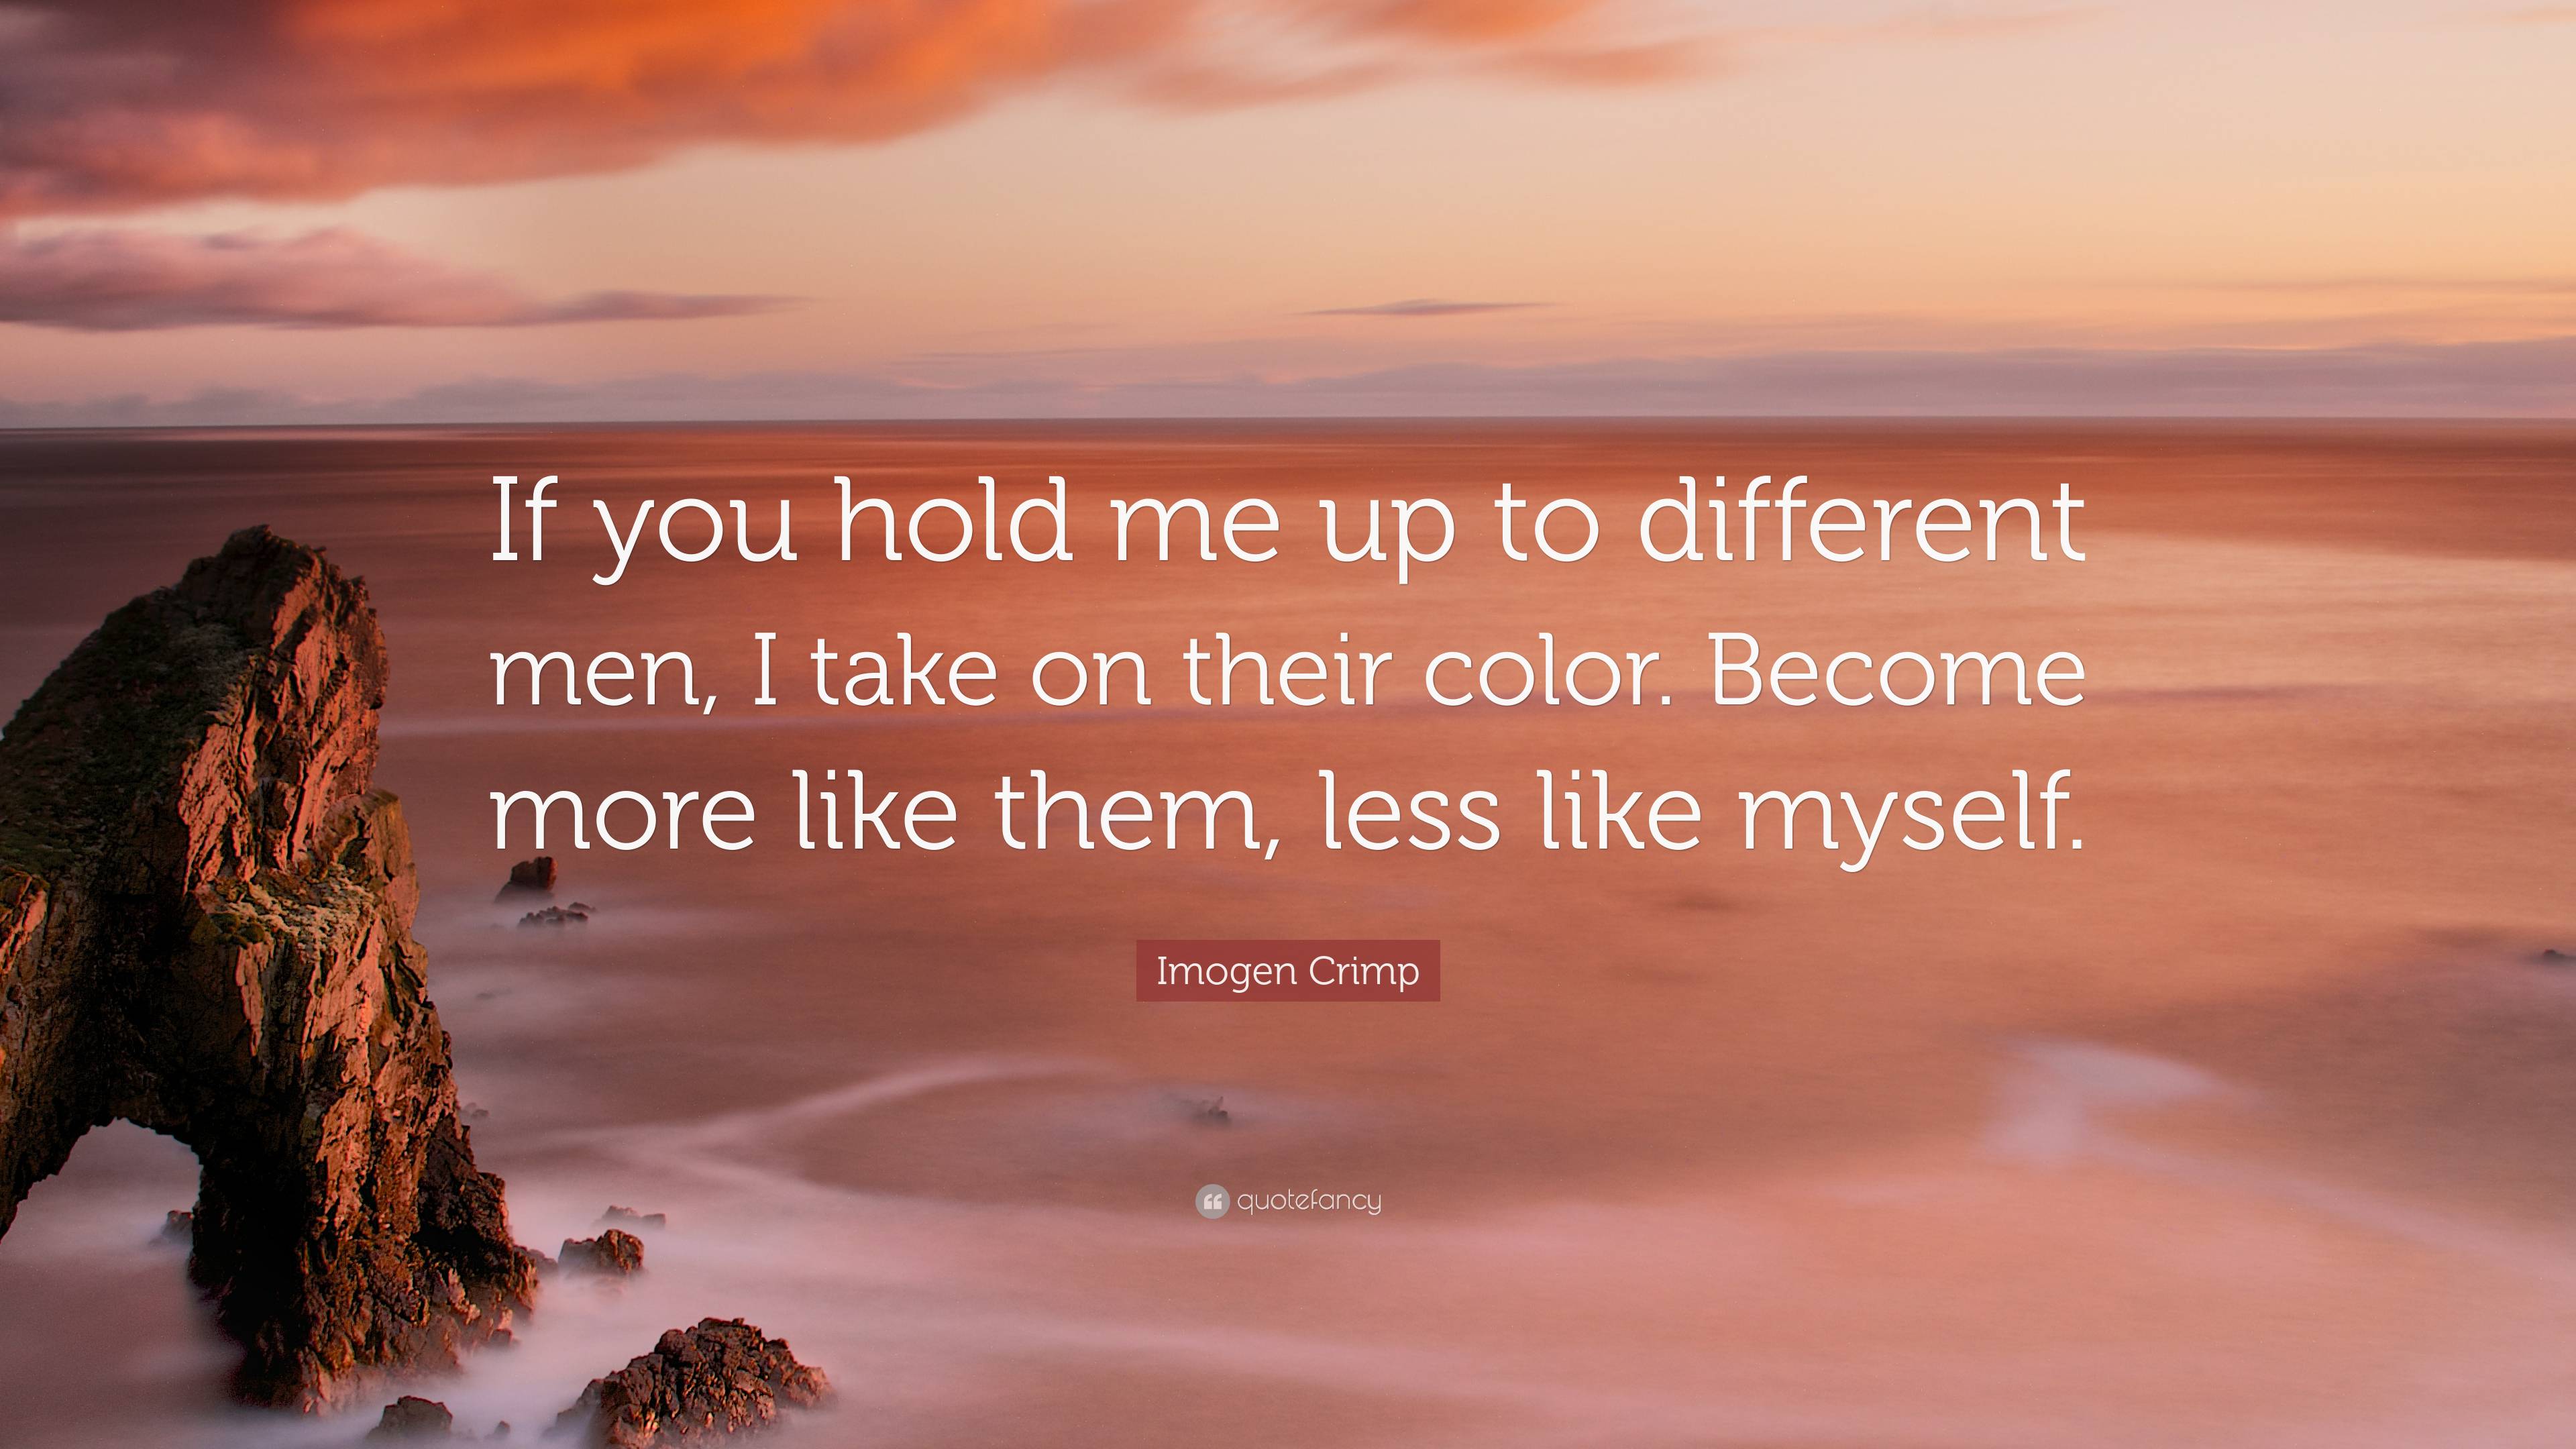 https://quotefancy.com/media/wallpaper/3840x2160/7516324-Imogen-Crimp-Quote-If-you-hold-me-up-to-different-men-I-take-on.jpg